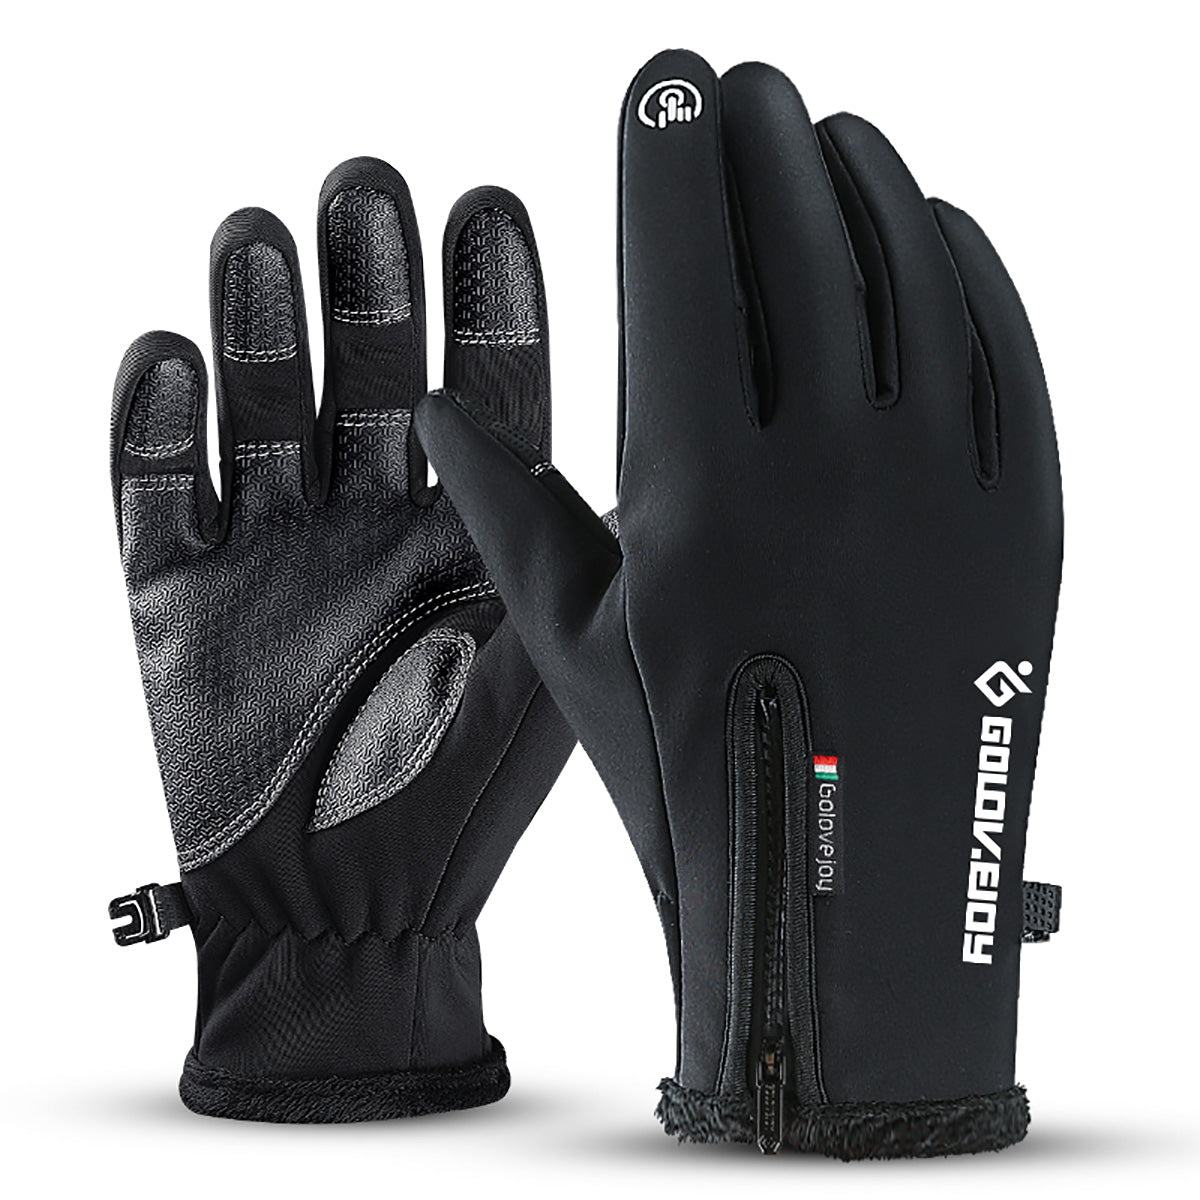 Dark Slate Gray Touch Screen Gloves Zipper Thermal Winter Sports Skiing Warm Mittens PU Leather Black